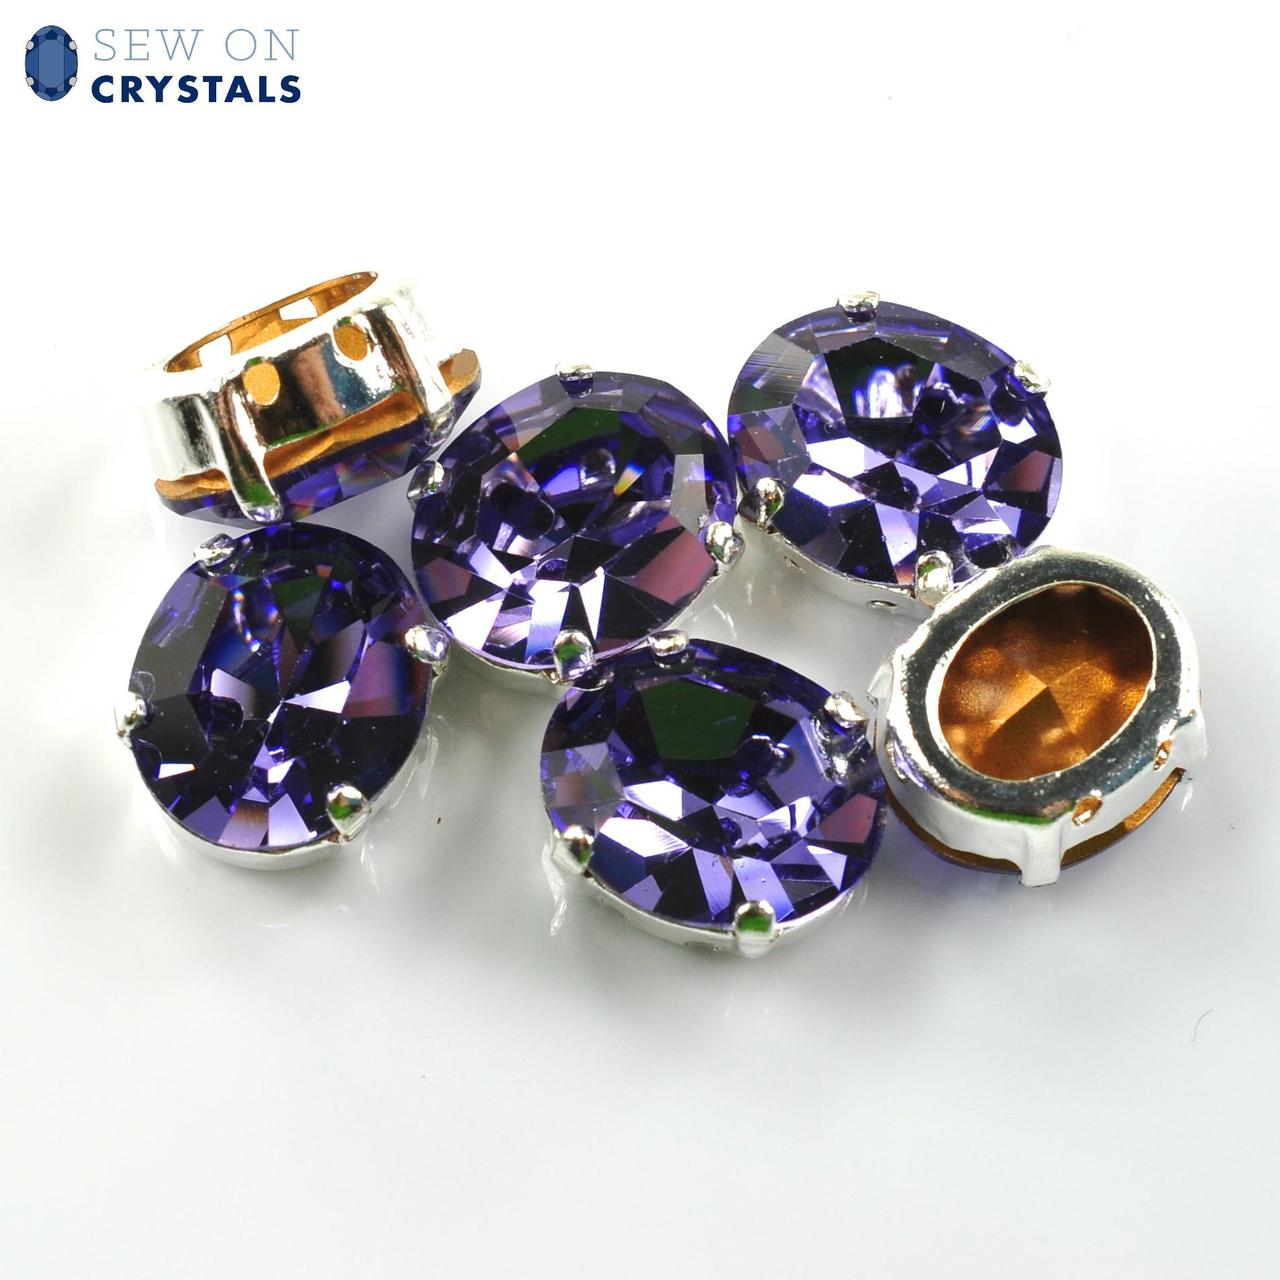 Tanzanite 12x10mm Oval Sew On Crystals - 6 Pieces